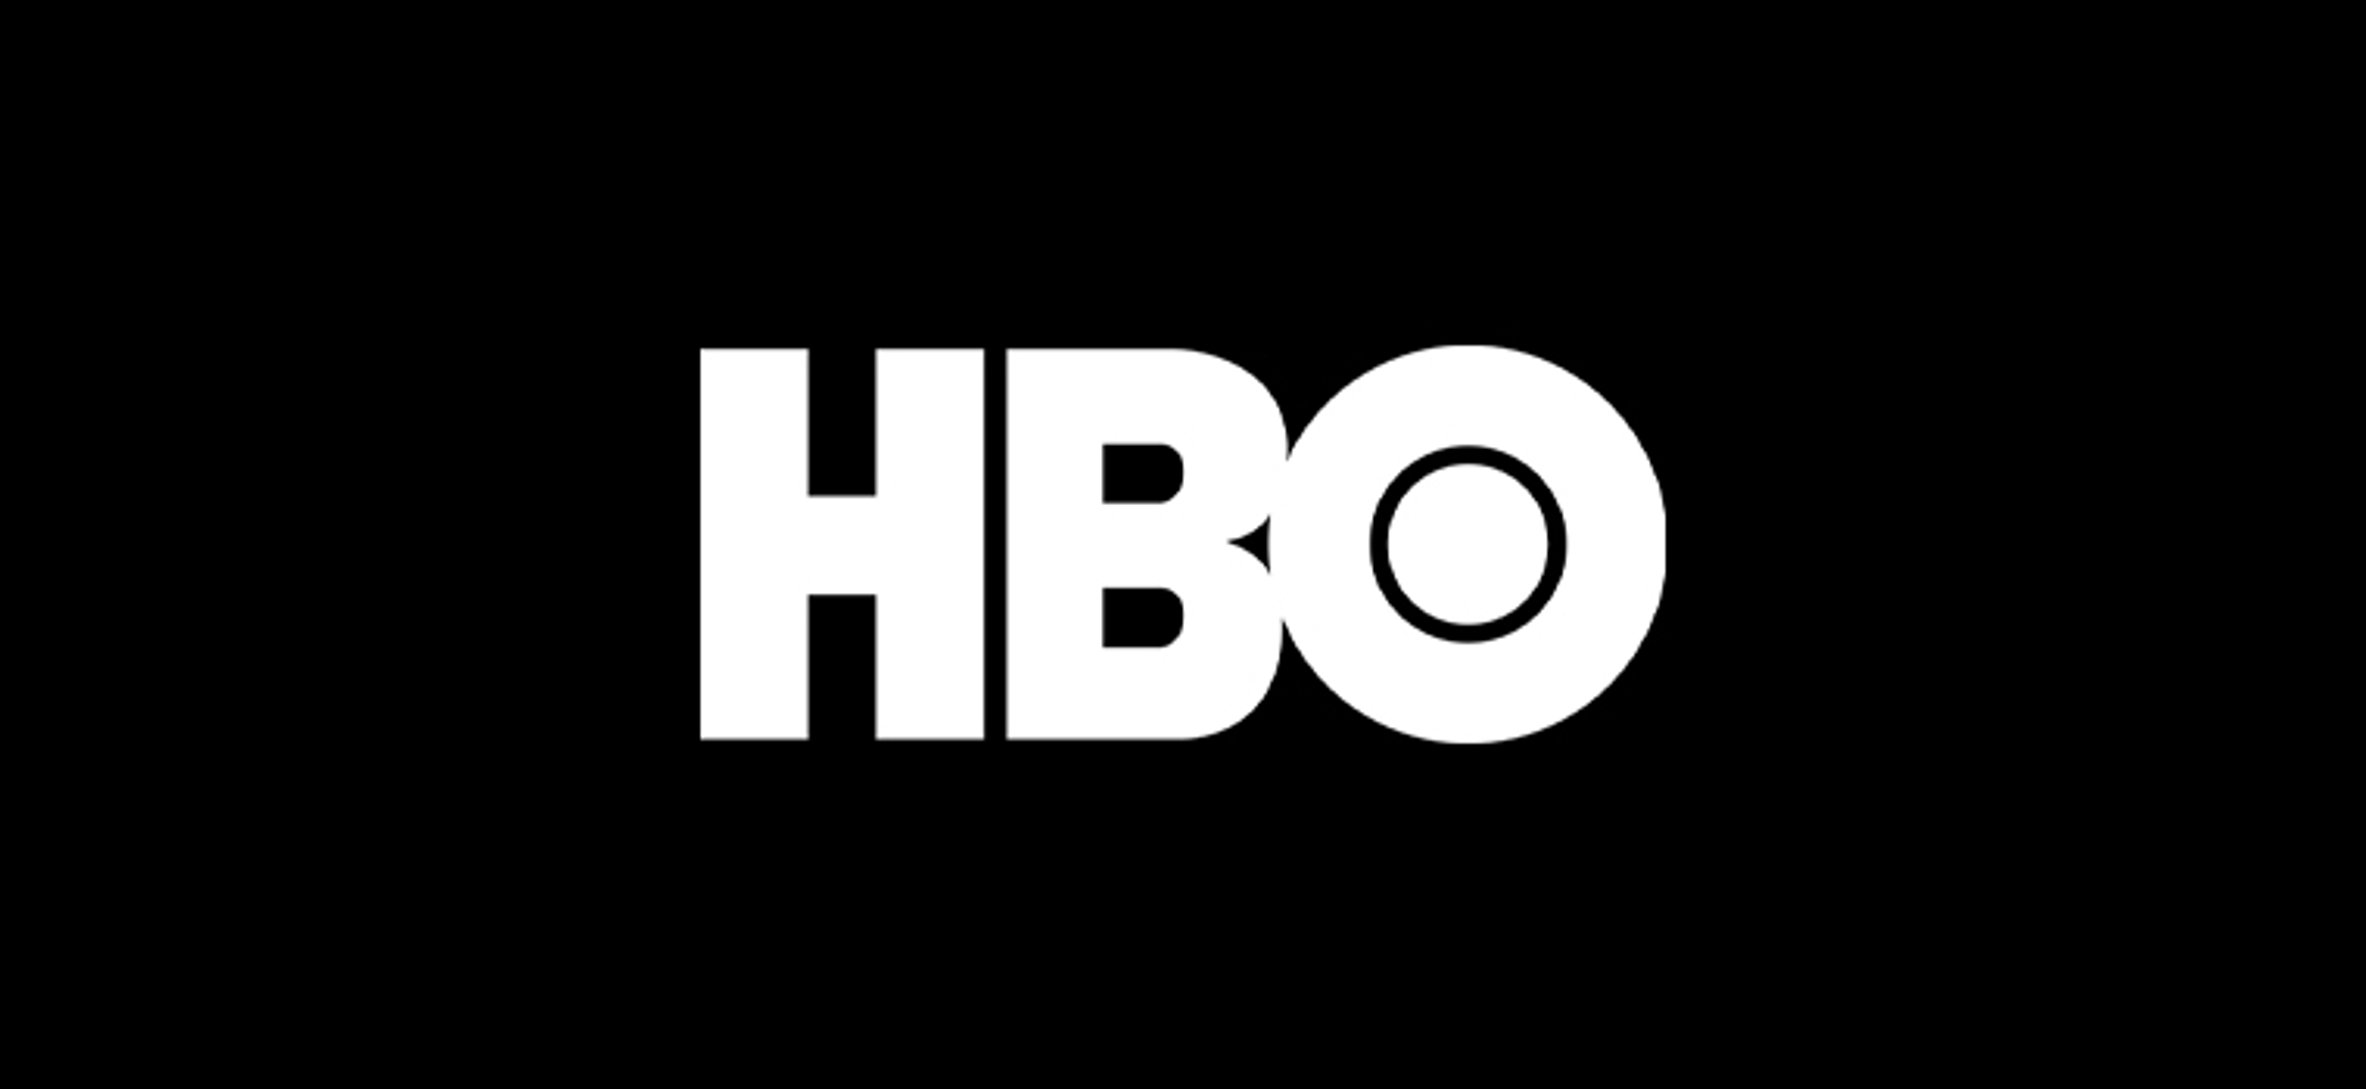 Casting African American Couples For A New HBO Series!